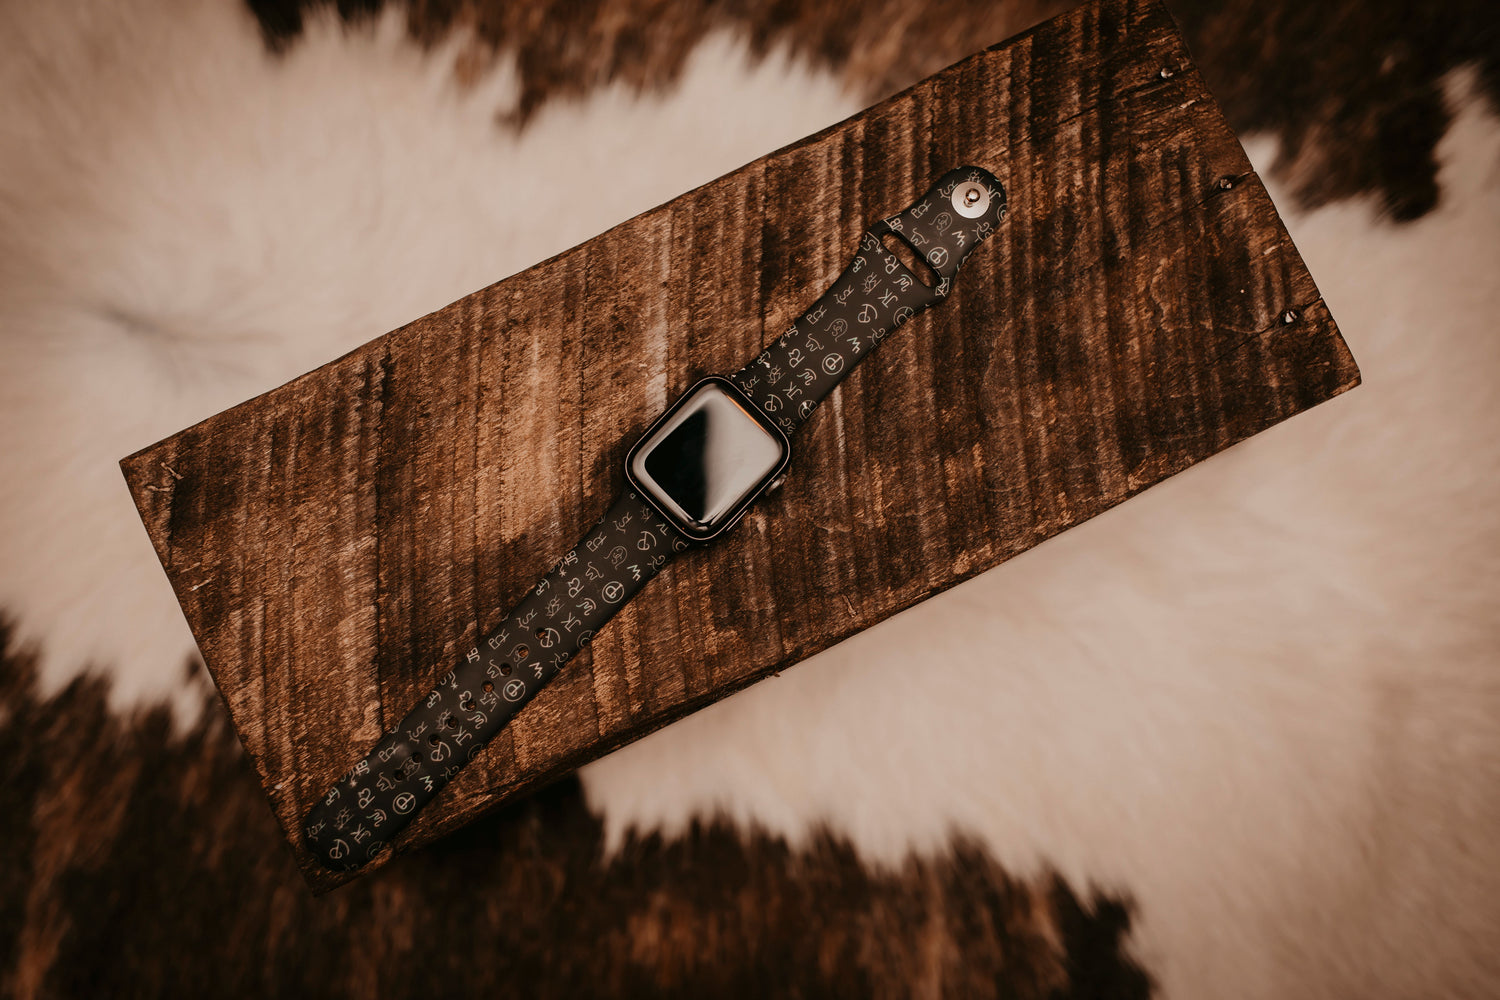 Watch Bands & Everyday Jewelry